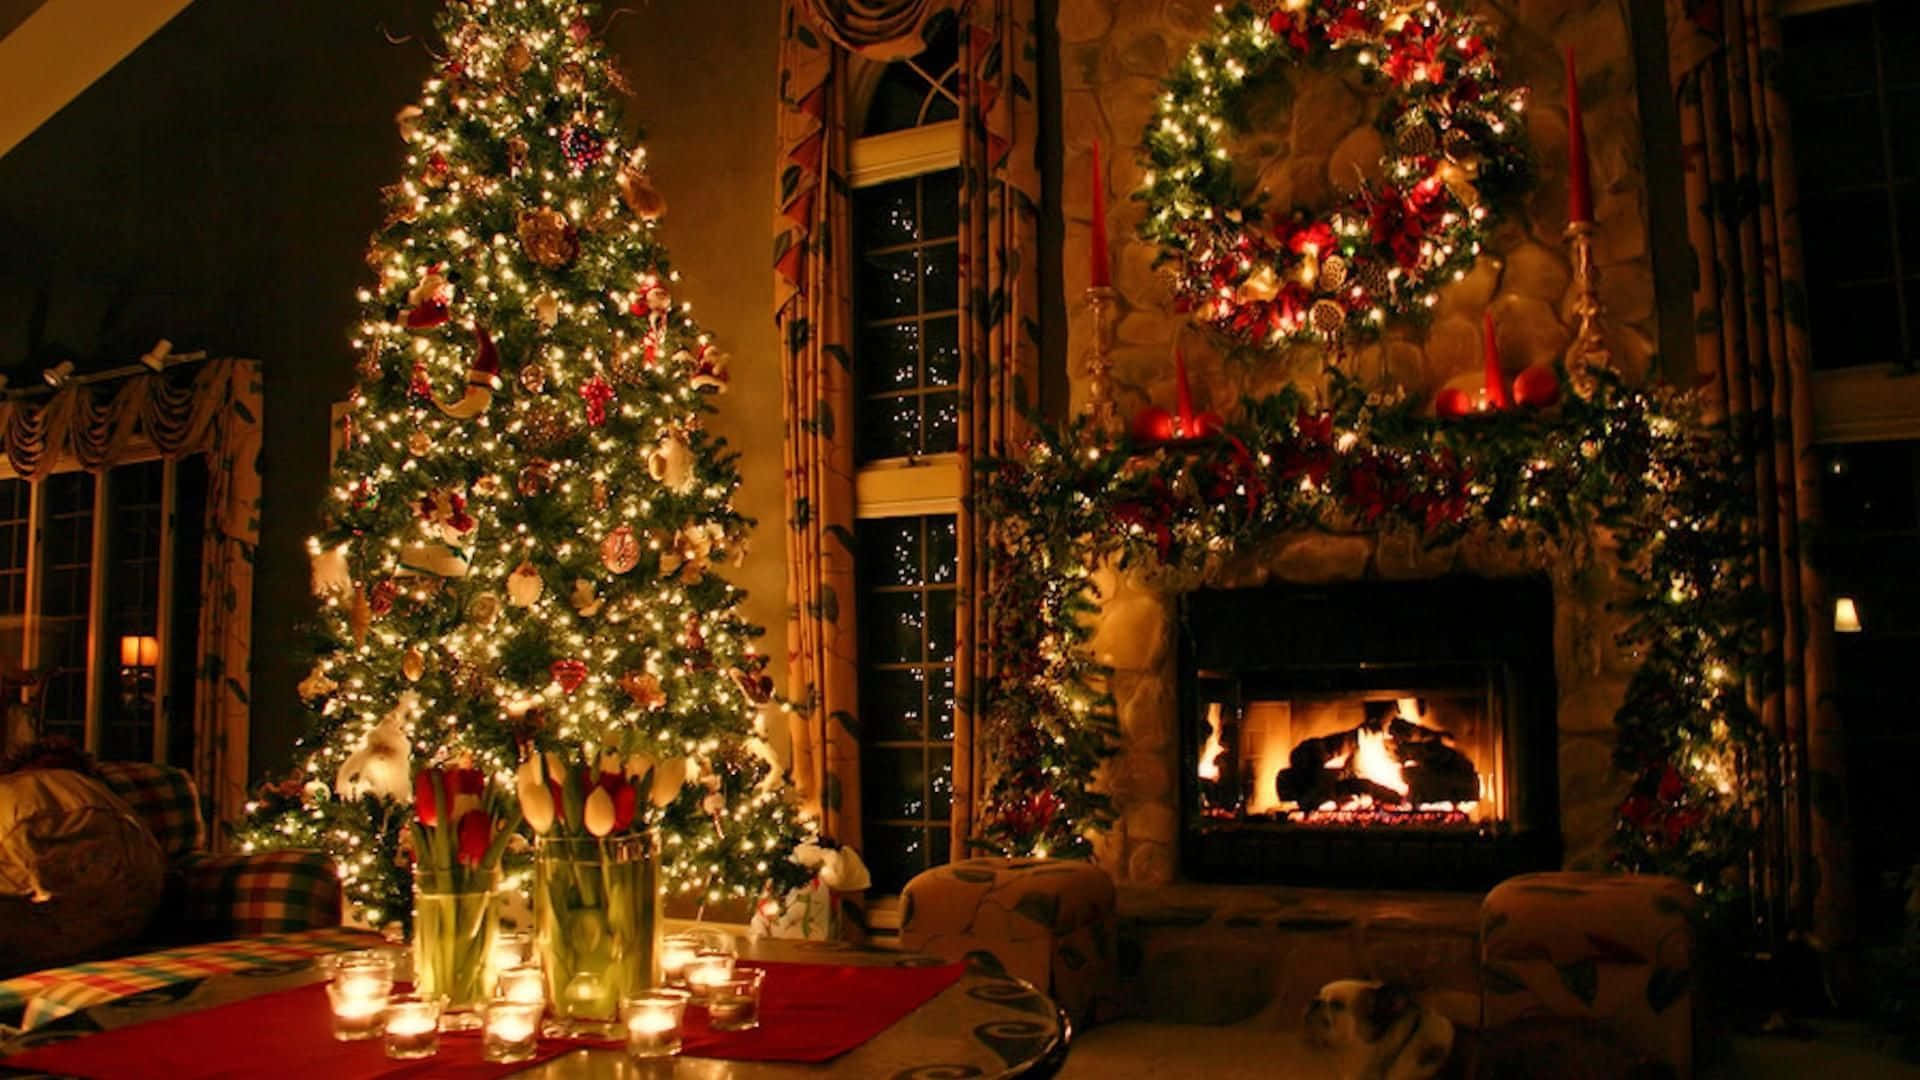 Christmas Tree In The Living Room With Candles And A Fireplace